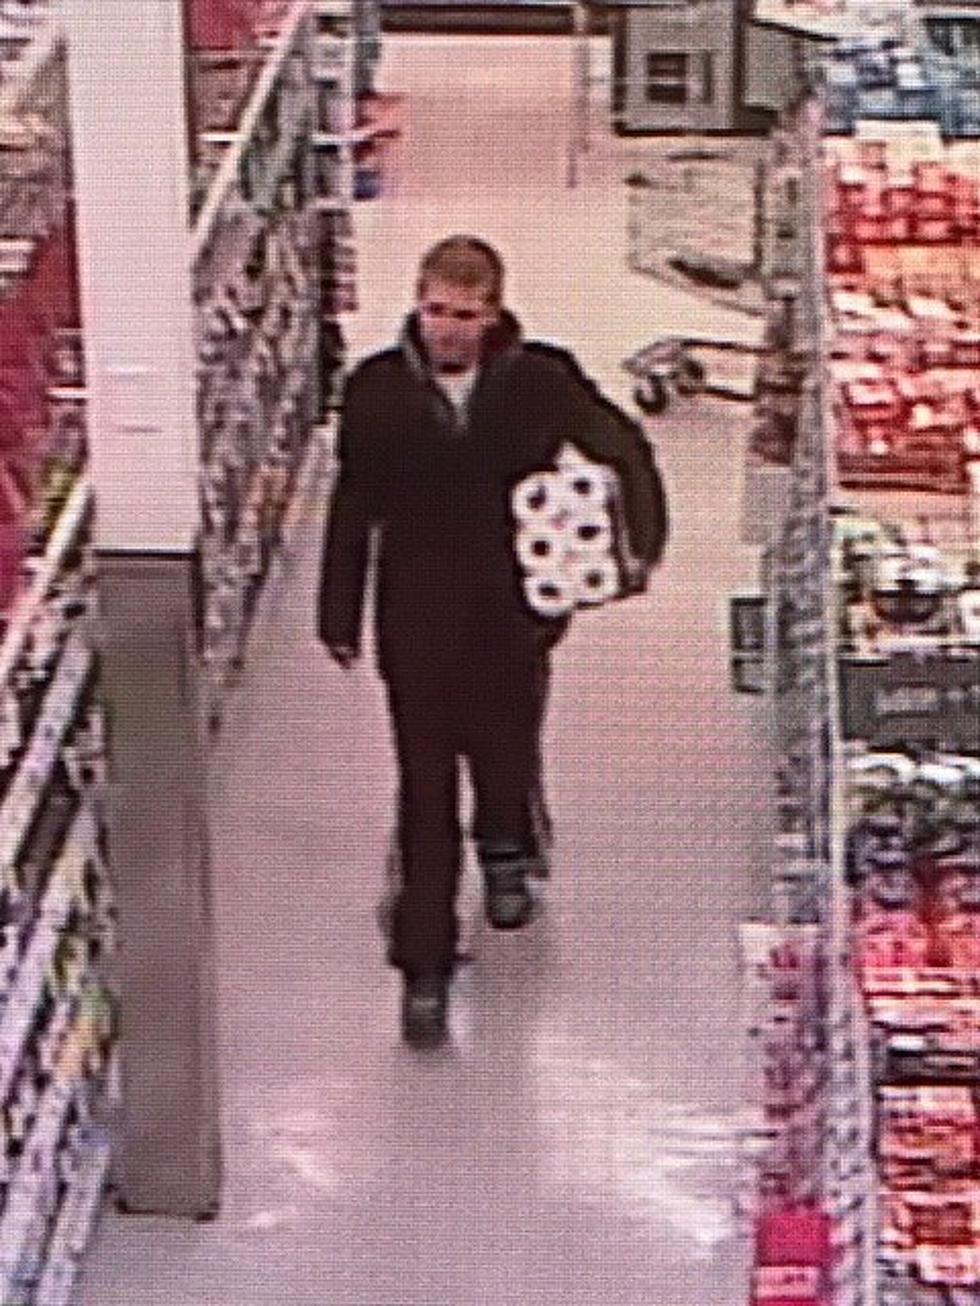 Toilet Paper Bandit on the Loose in Sycamore